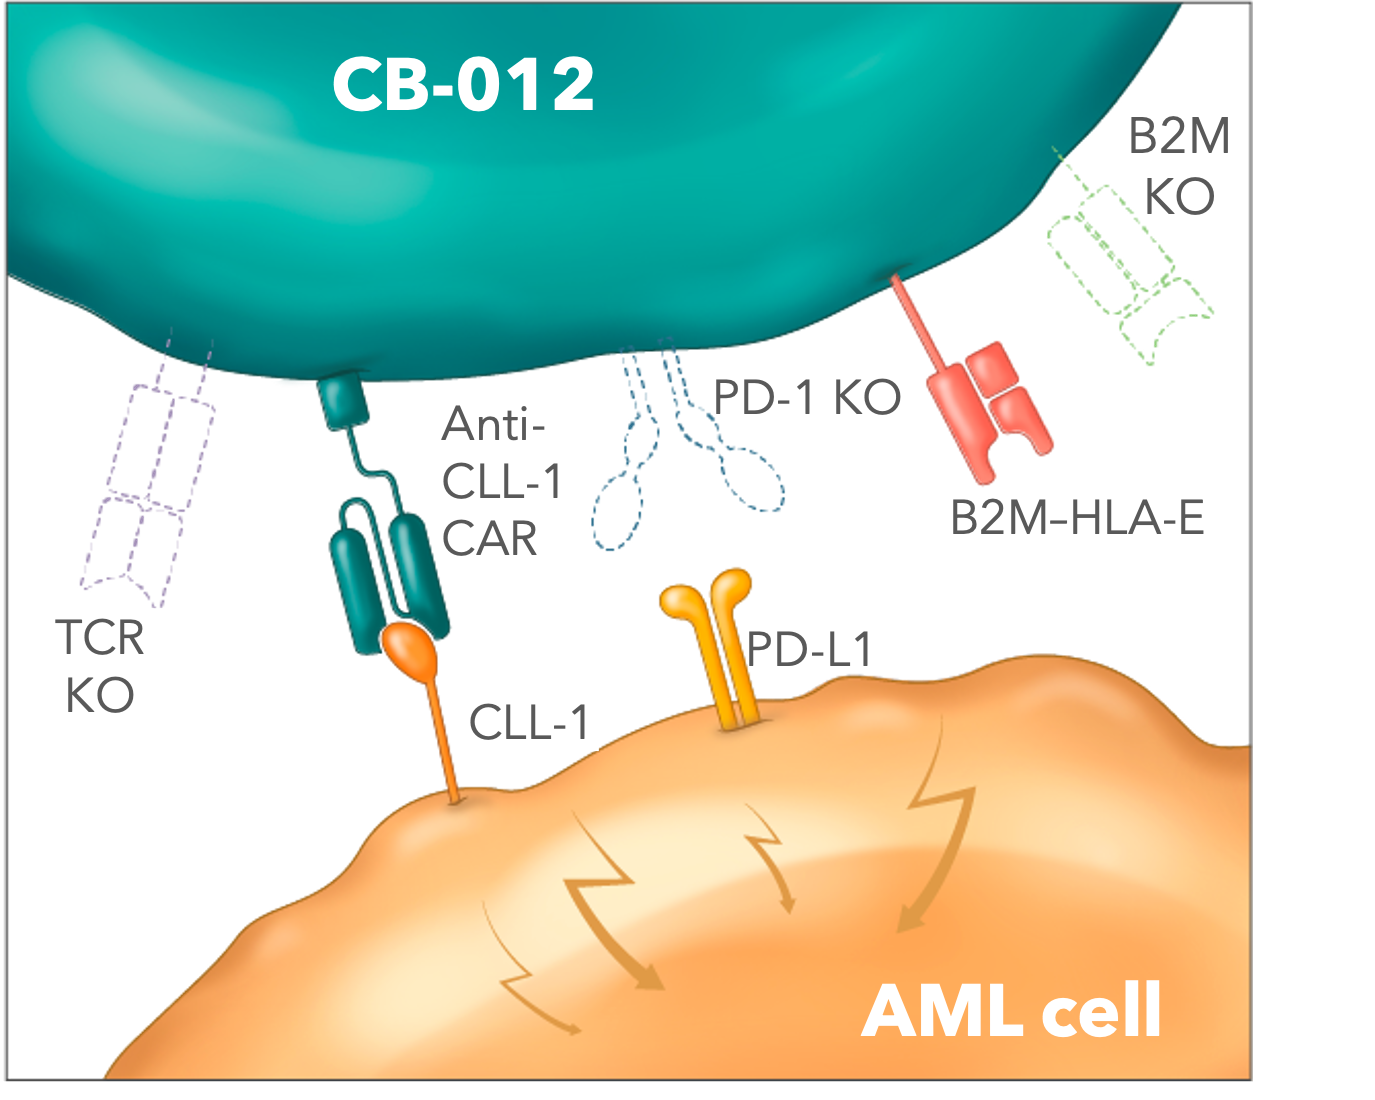 CB-012, a genome-edited allogeneic anti-CLL-1 CAR-T cell therapy with both checkpoint disruption and immune cloaking